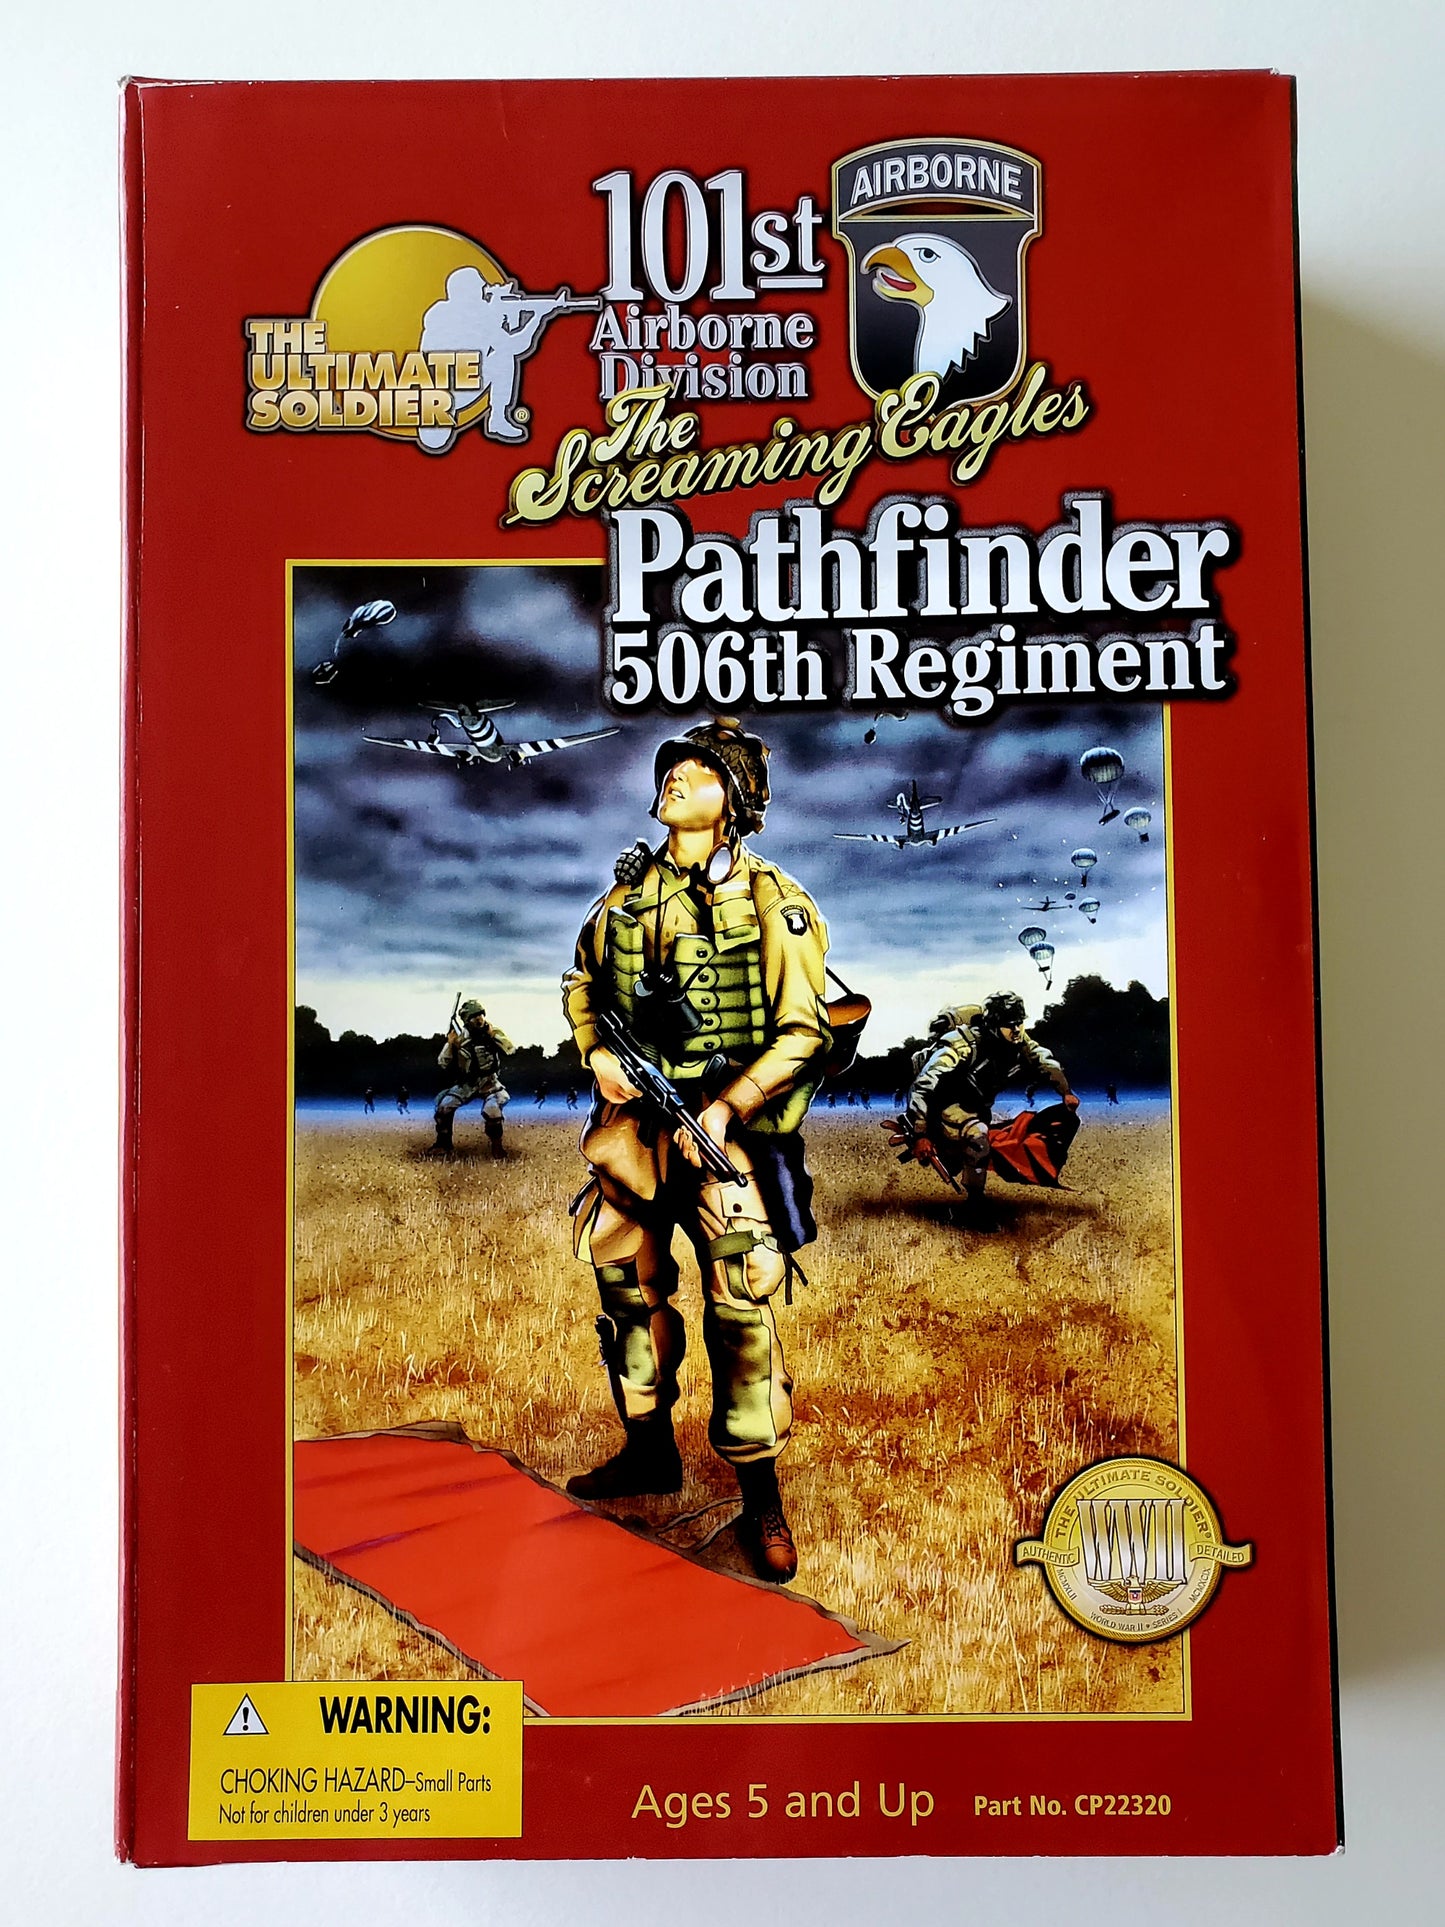 The Ultimate Soldier 101st Airborne Division Pathfinder 506th Regiment The Screaming Eagles